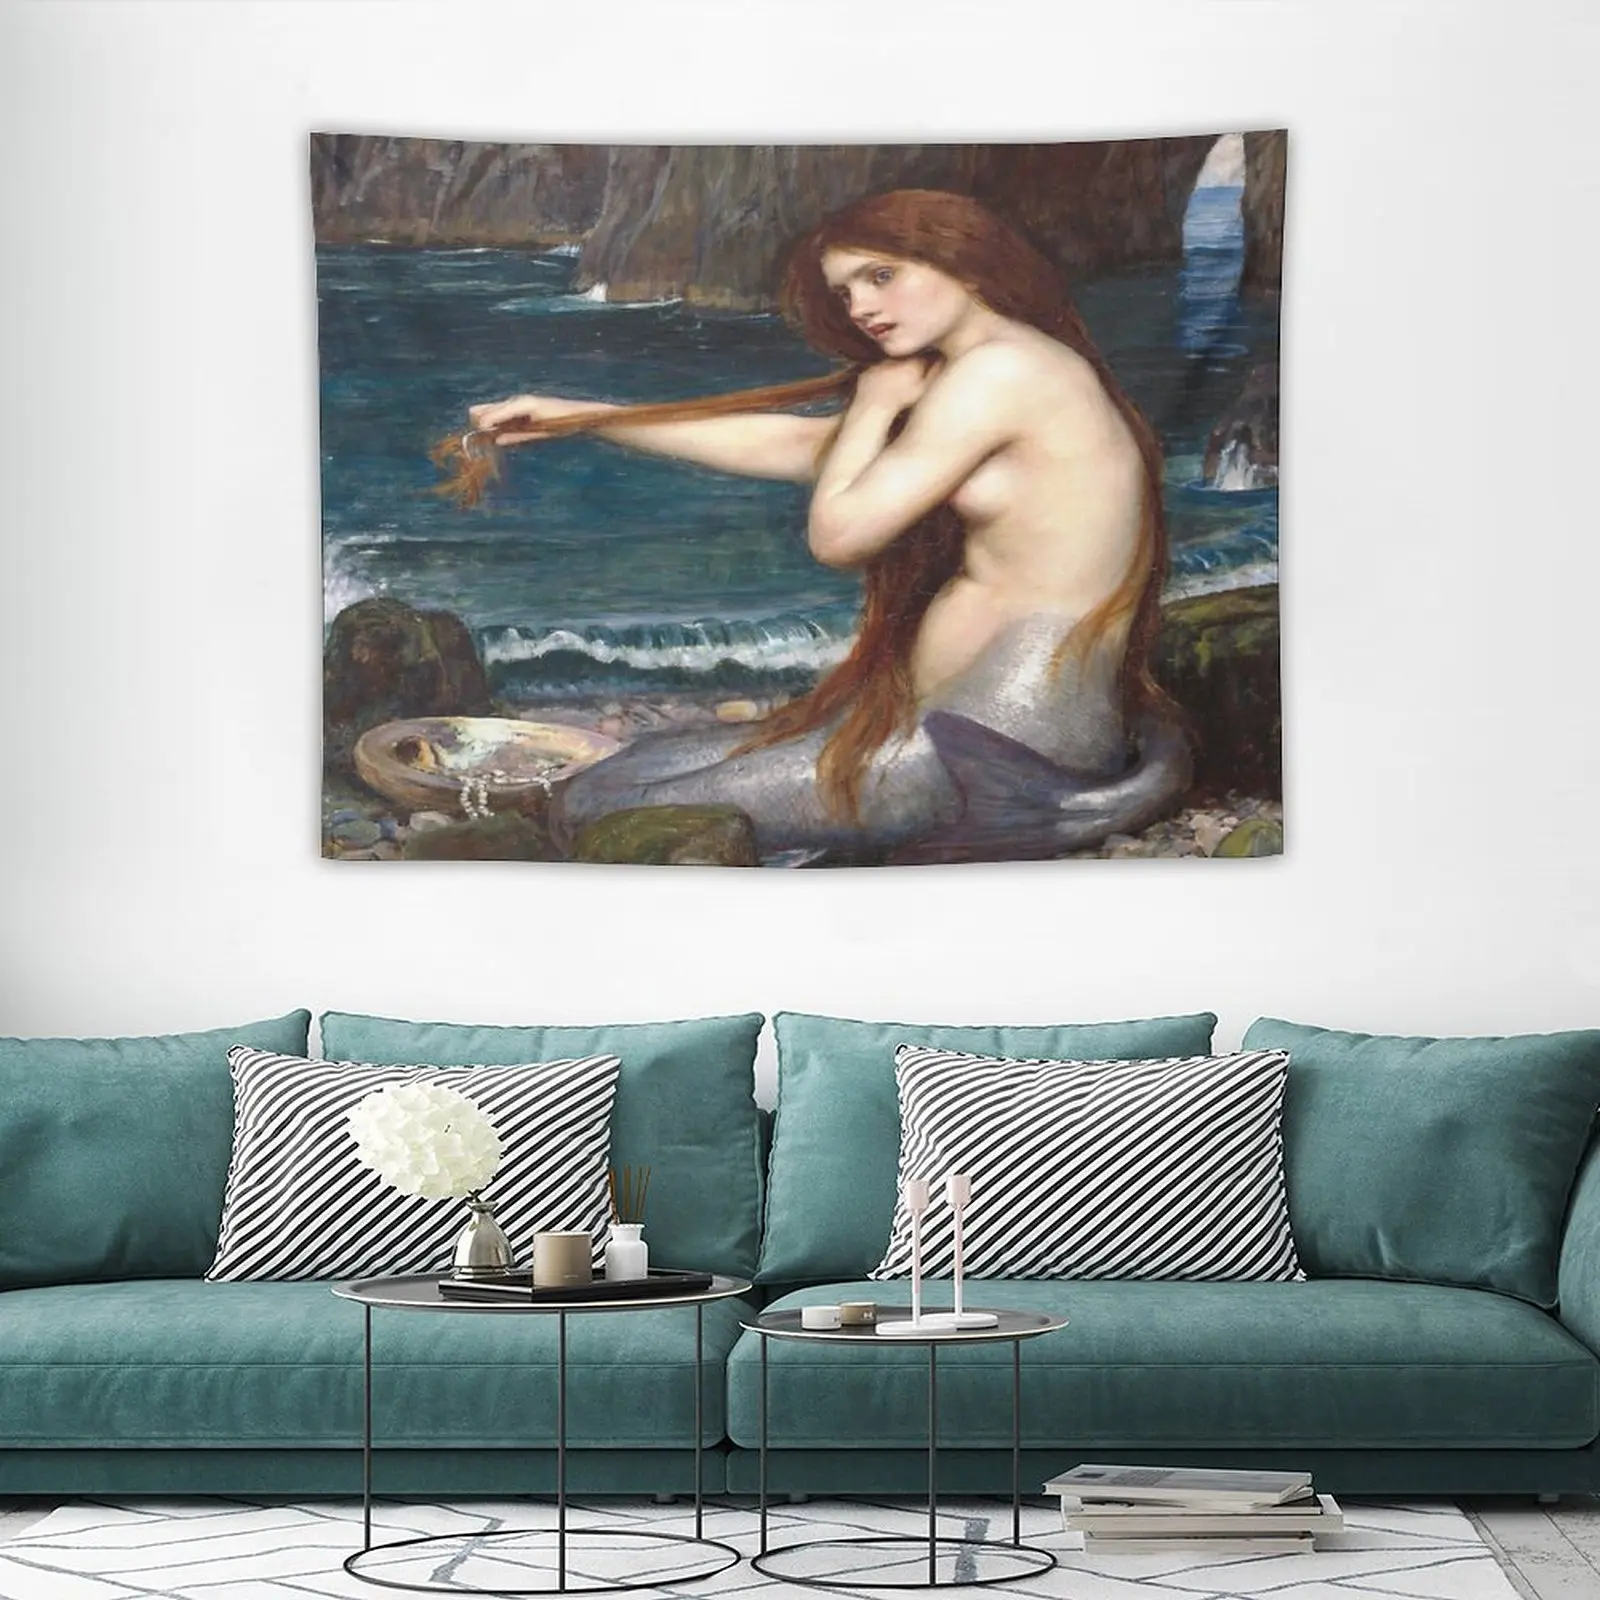 

Astrology Mermaid - John William Waterhouse Tapestry Fabric Poster Cloth Wall Coverings Room Decor Gothic Room Decor